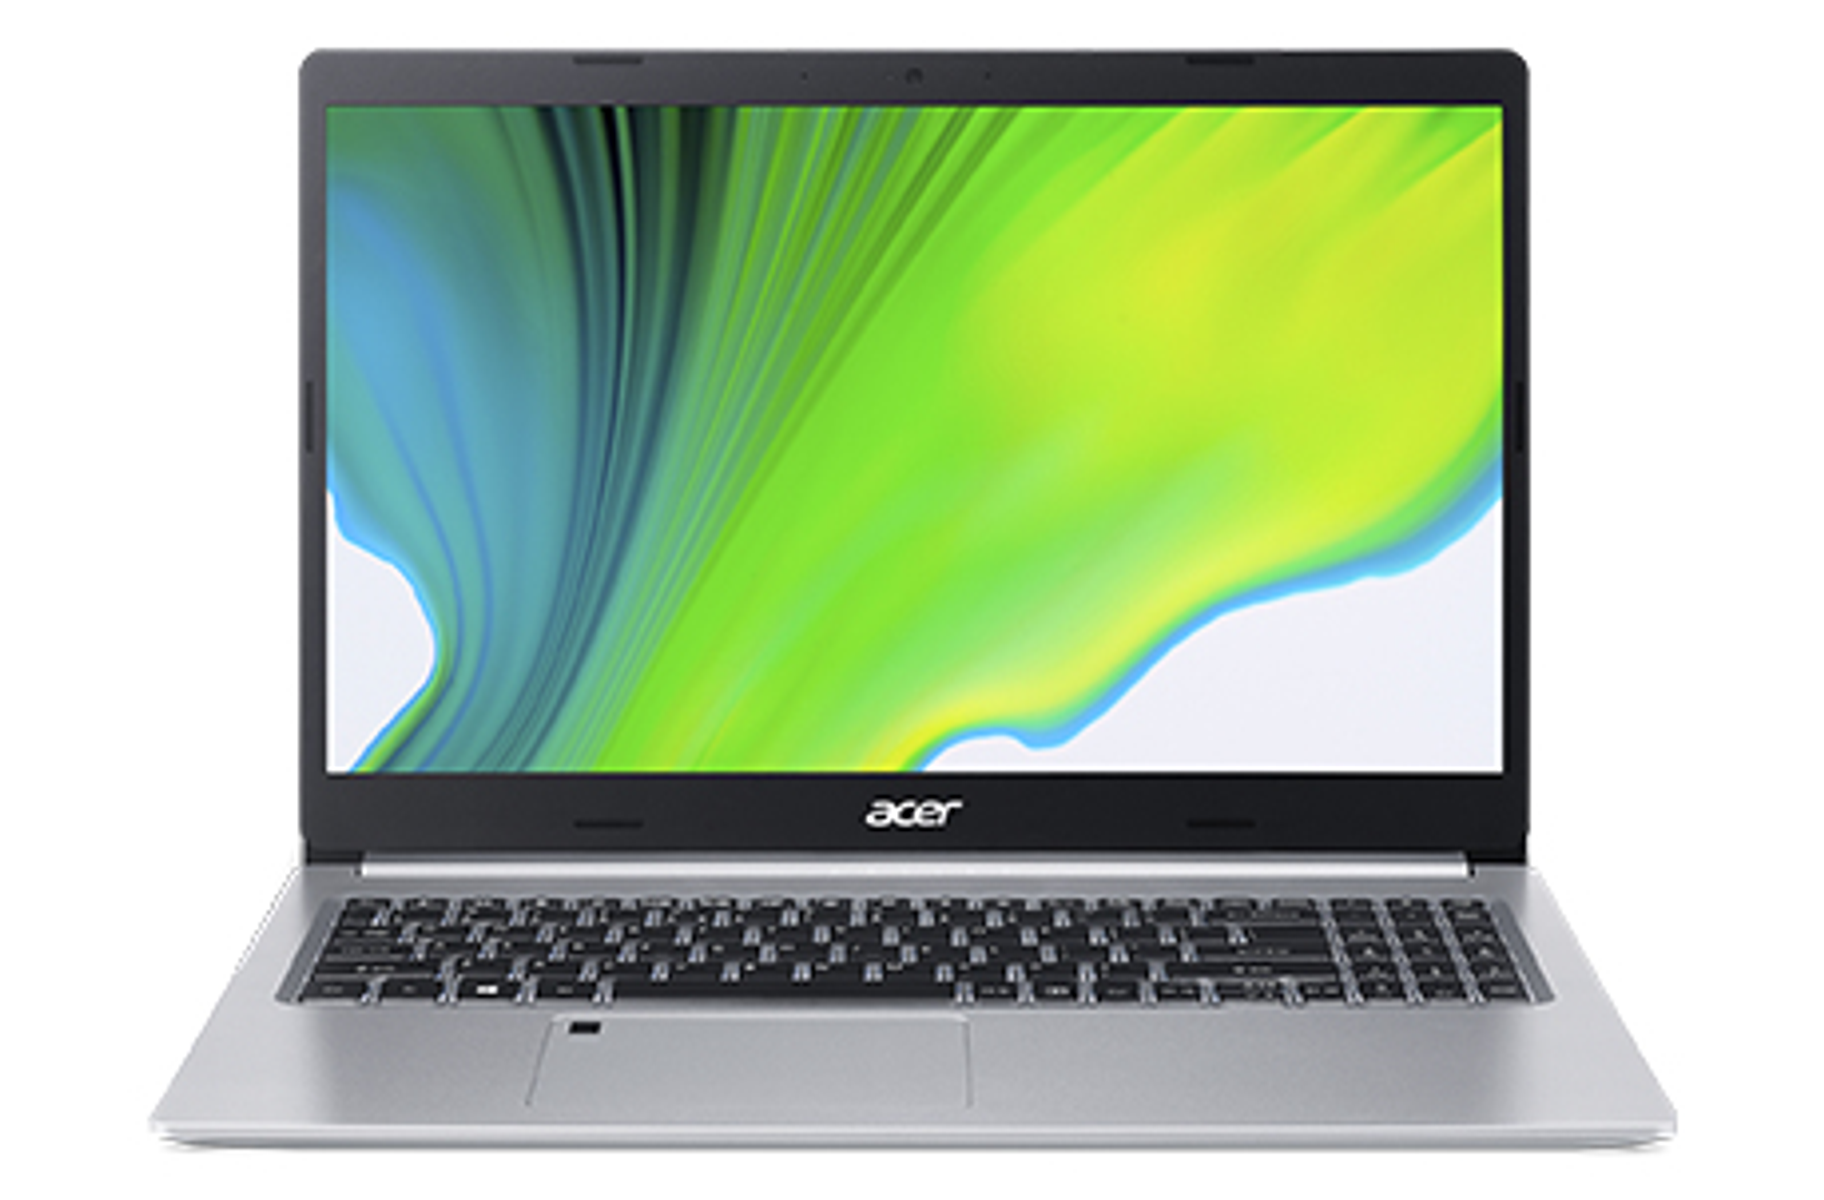 AMD A515-44-R0NR, Prozessor, Silber GB GB Core™ ACER Display, RAM, 8 256 Zoll 15,60 mit Notebook SSD, i5